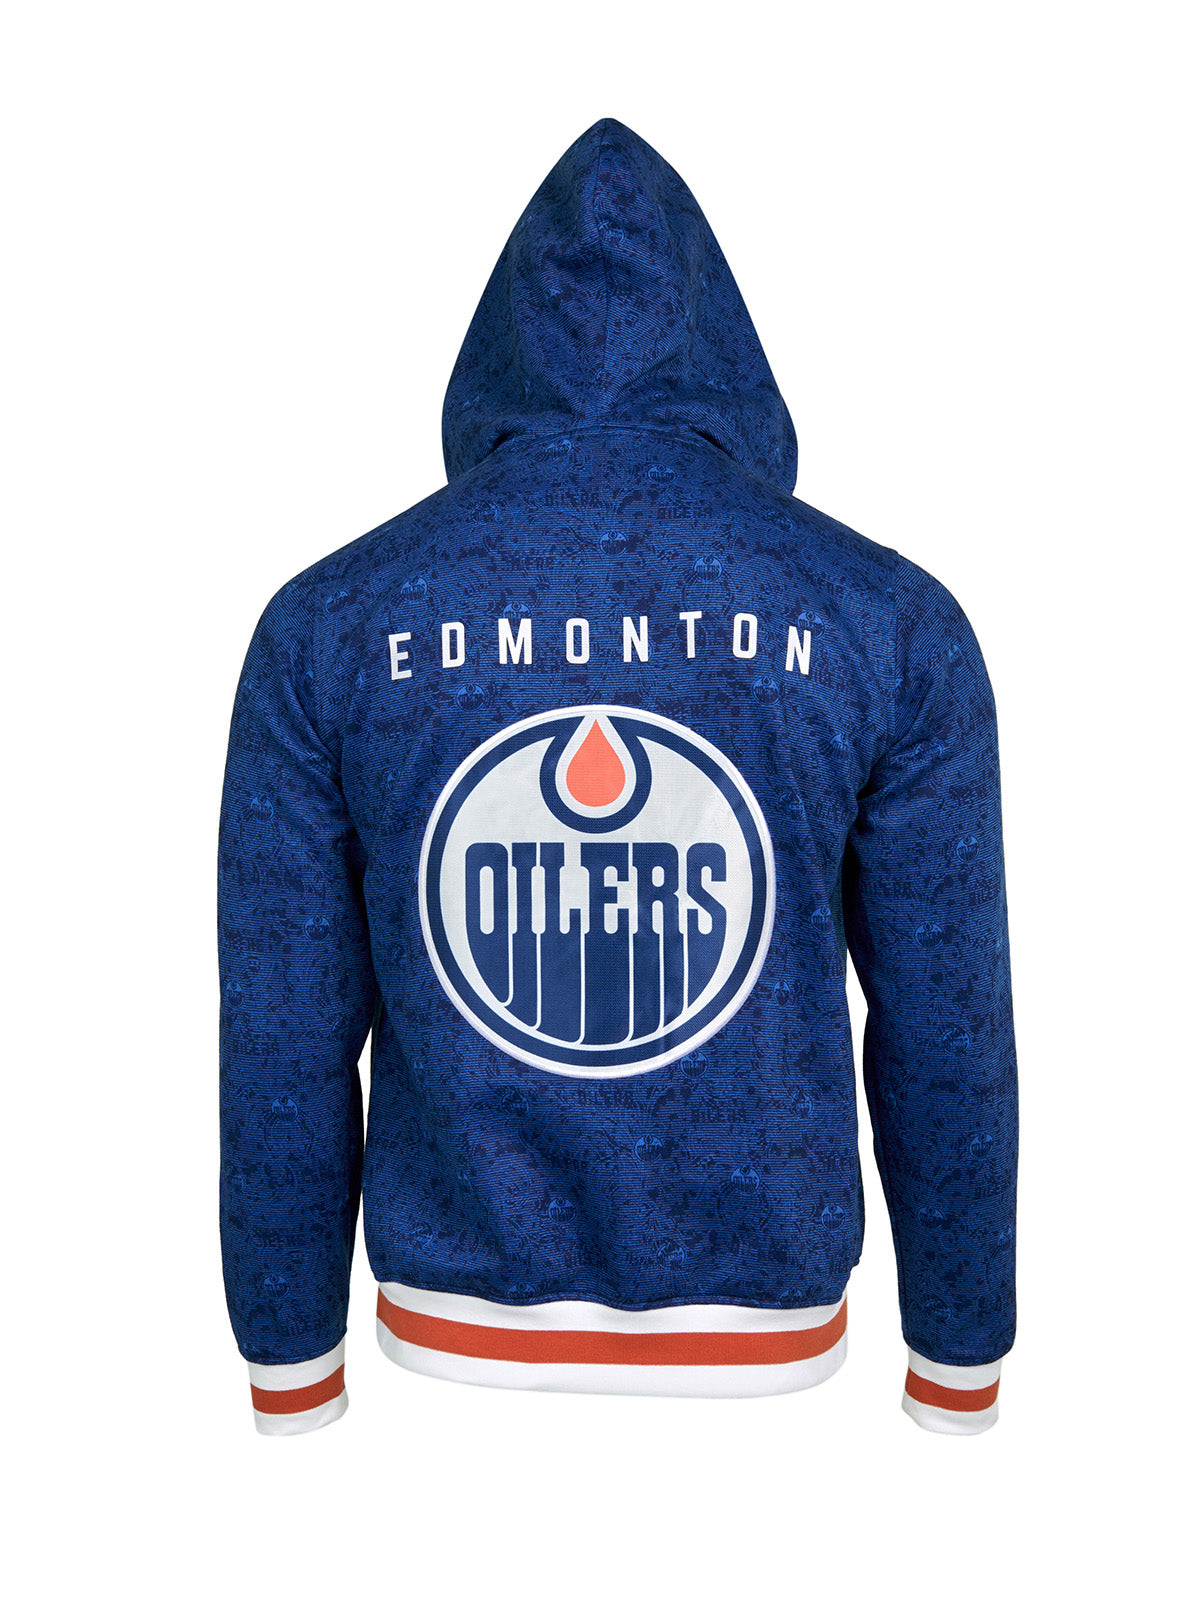 Edmonton Oilers Hoodie - Show your team spirit, with the iconic team logo patch centered on the back, and proudly display your Edmonton Oilers support in their team colors with this NHL hockey hoodie.